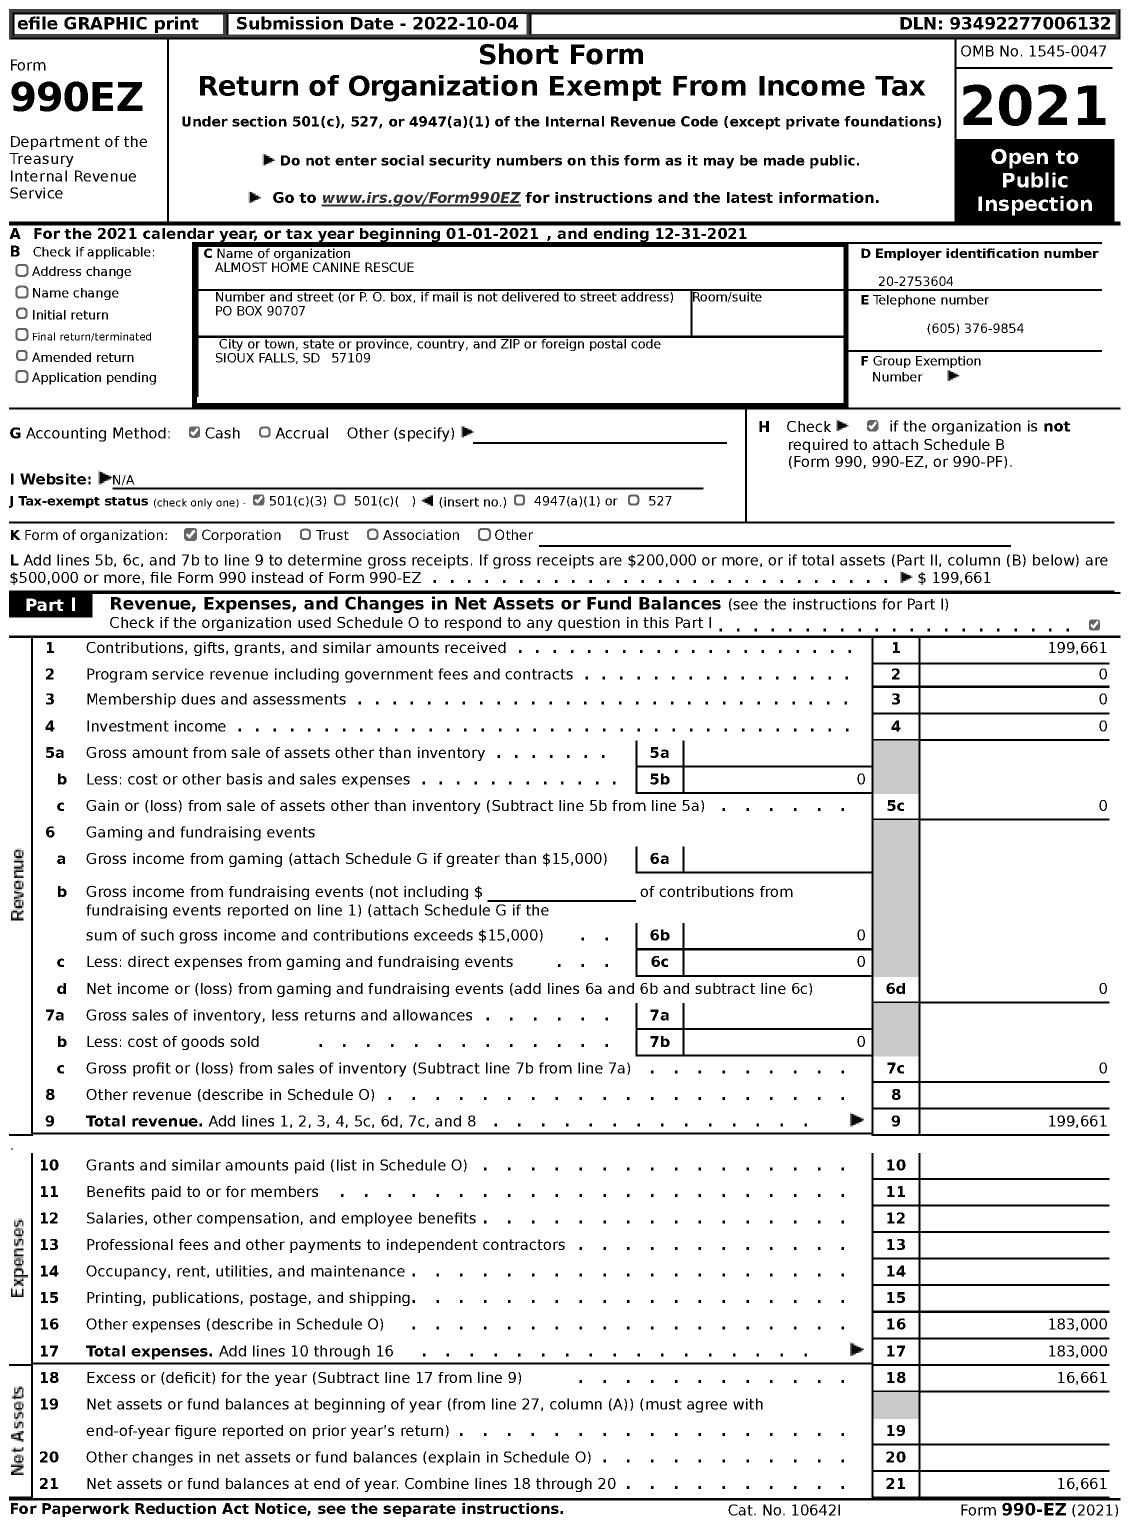 Image of first page of 2021 Form 990EZ for Almost Home Canine Rescue (AHCR)